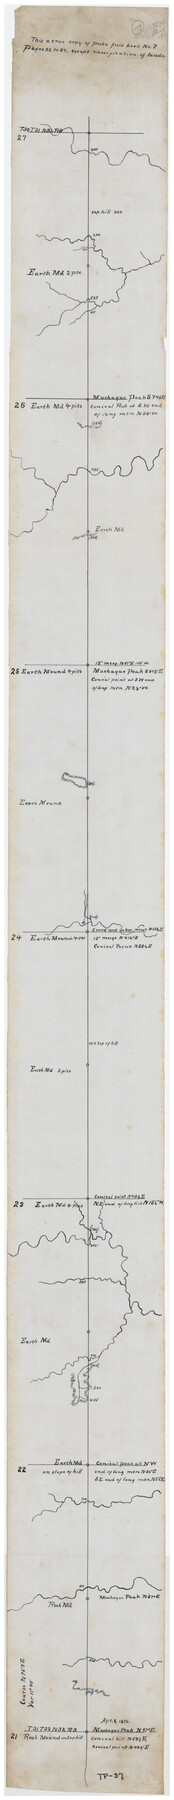 89726, This is a true copy of Peck's field book No. 7 pages 22 to 27, except classification of lands, Twichell Survey Records